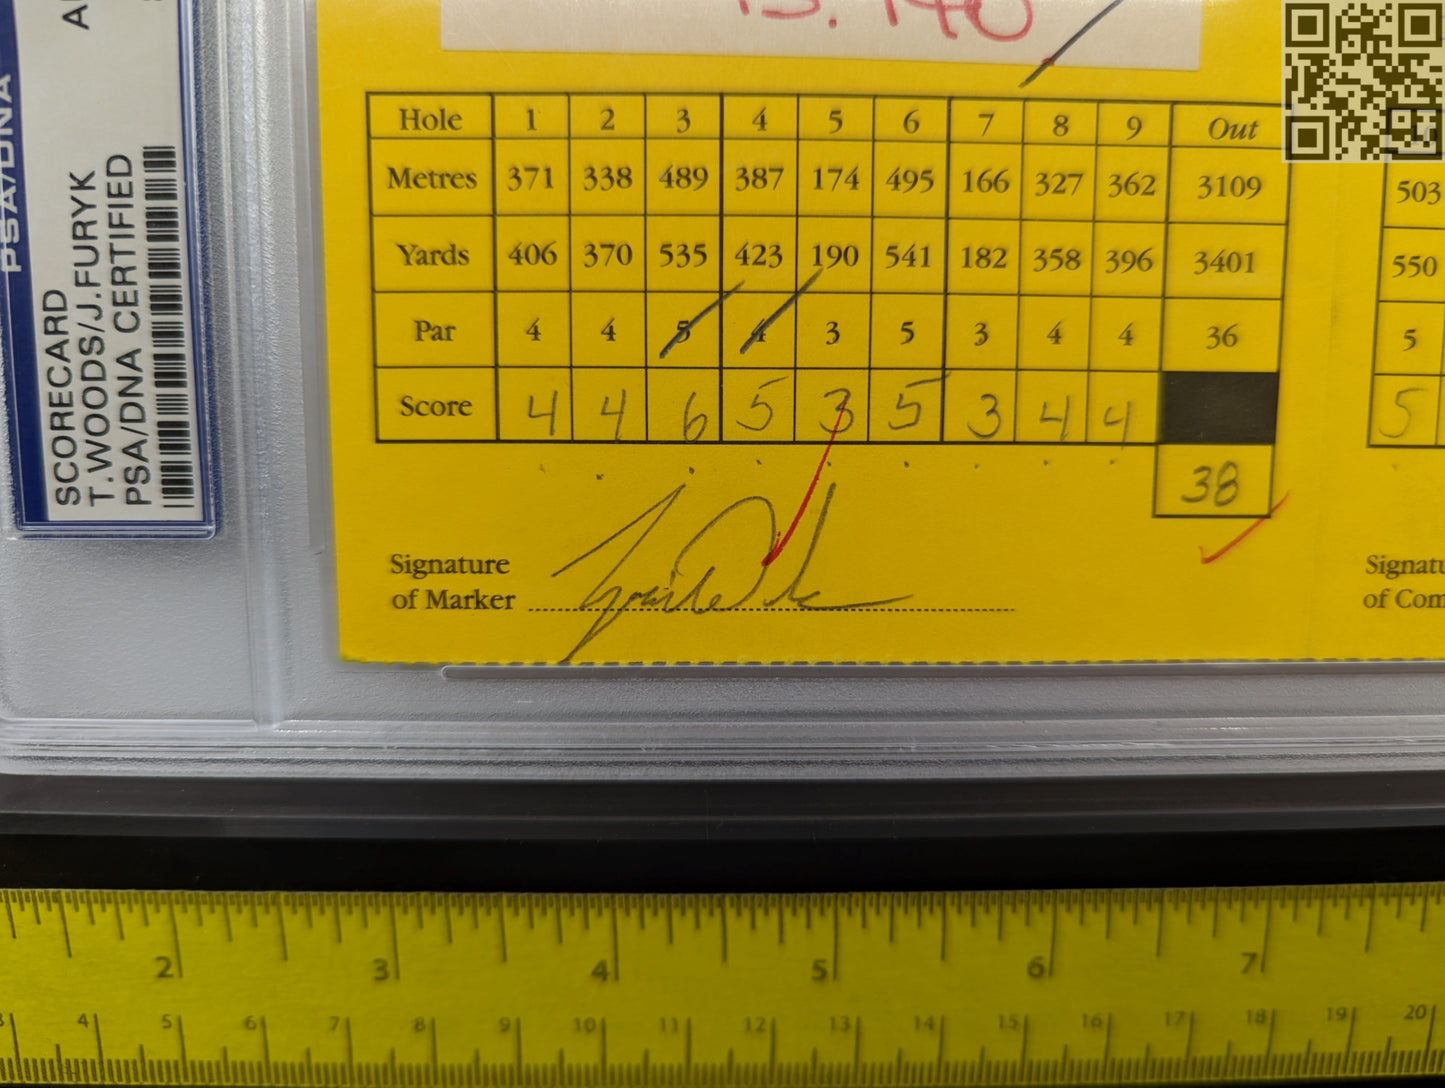 1999 Johnnie Walker Classic Tiger Woods Signed Official Tournament Scorecard 2nd Round